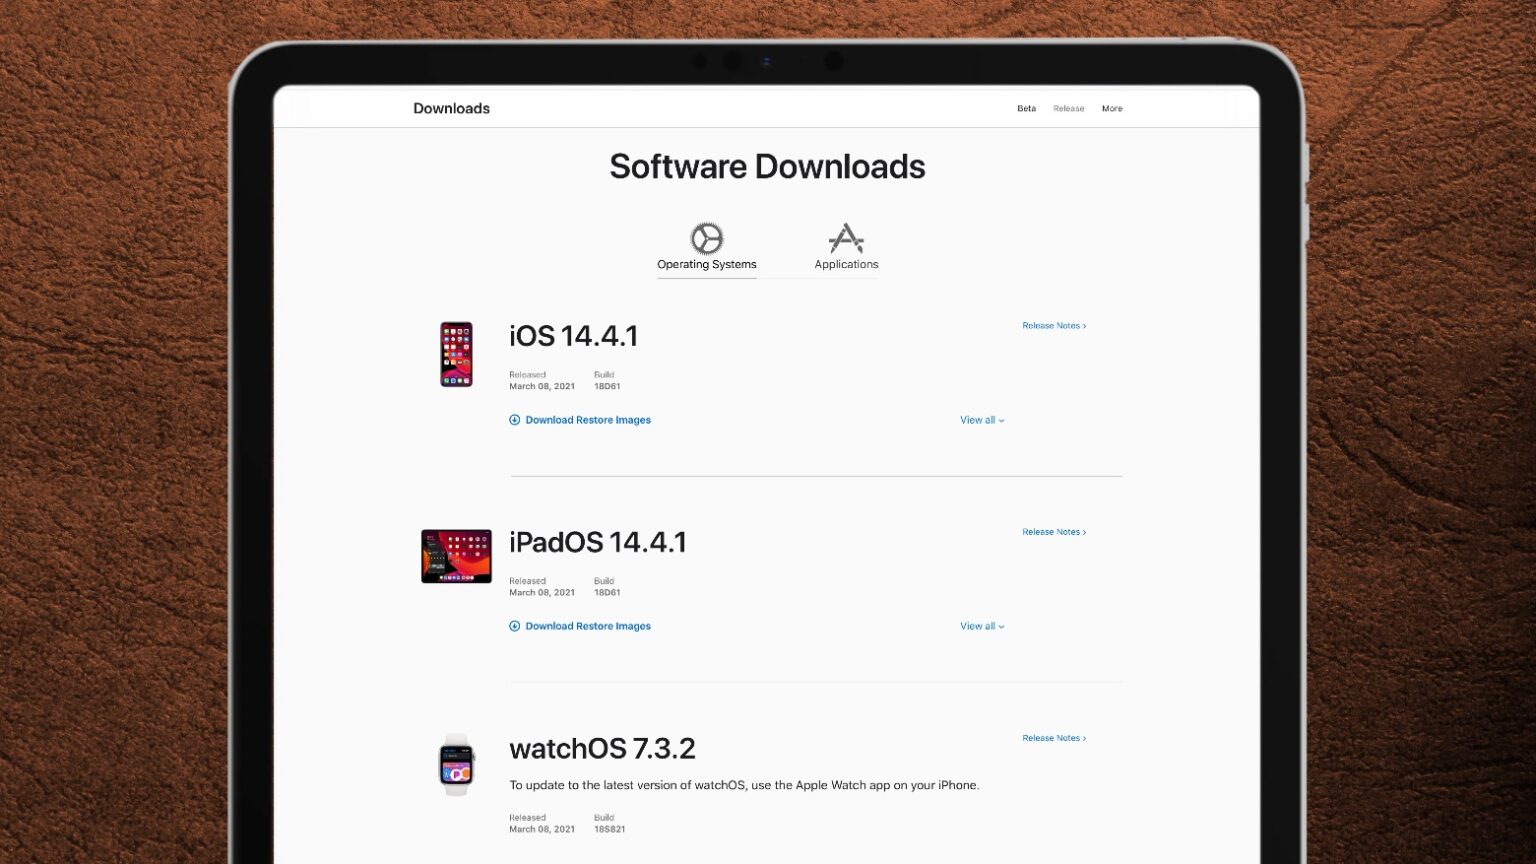 iOS 14.4.1 and iPadOS 14.4.1 and watchOS 7.3.2